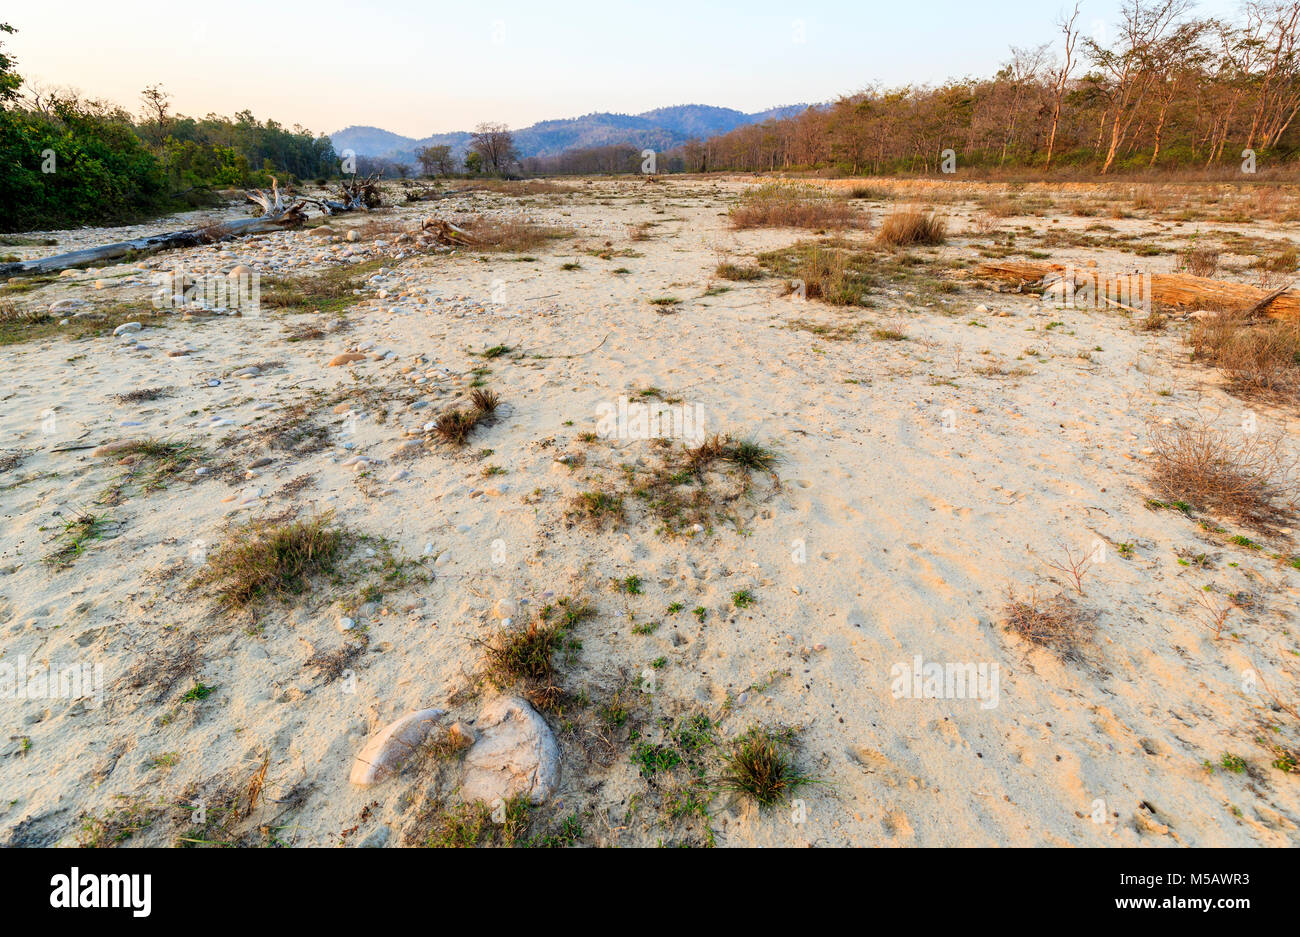 North Indian ecology: View of dried up riverbed in Jim Corbett National Park wildlife sanctuary, Ramnagar, Uttarakhand State, northern India Stock Photo